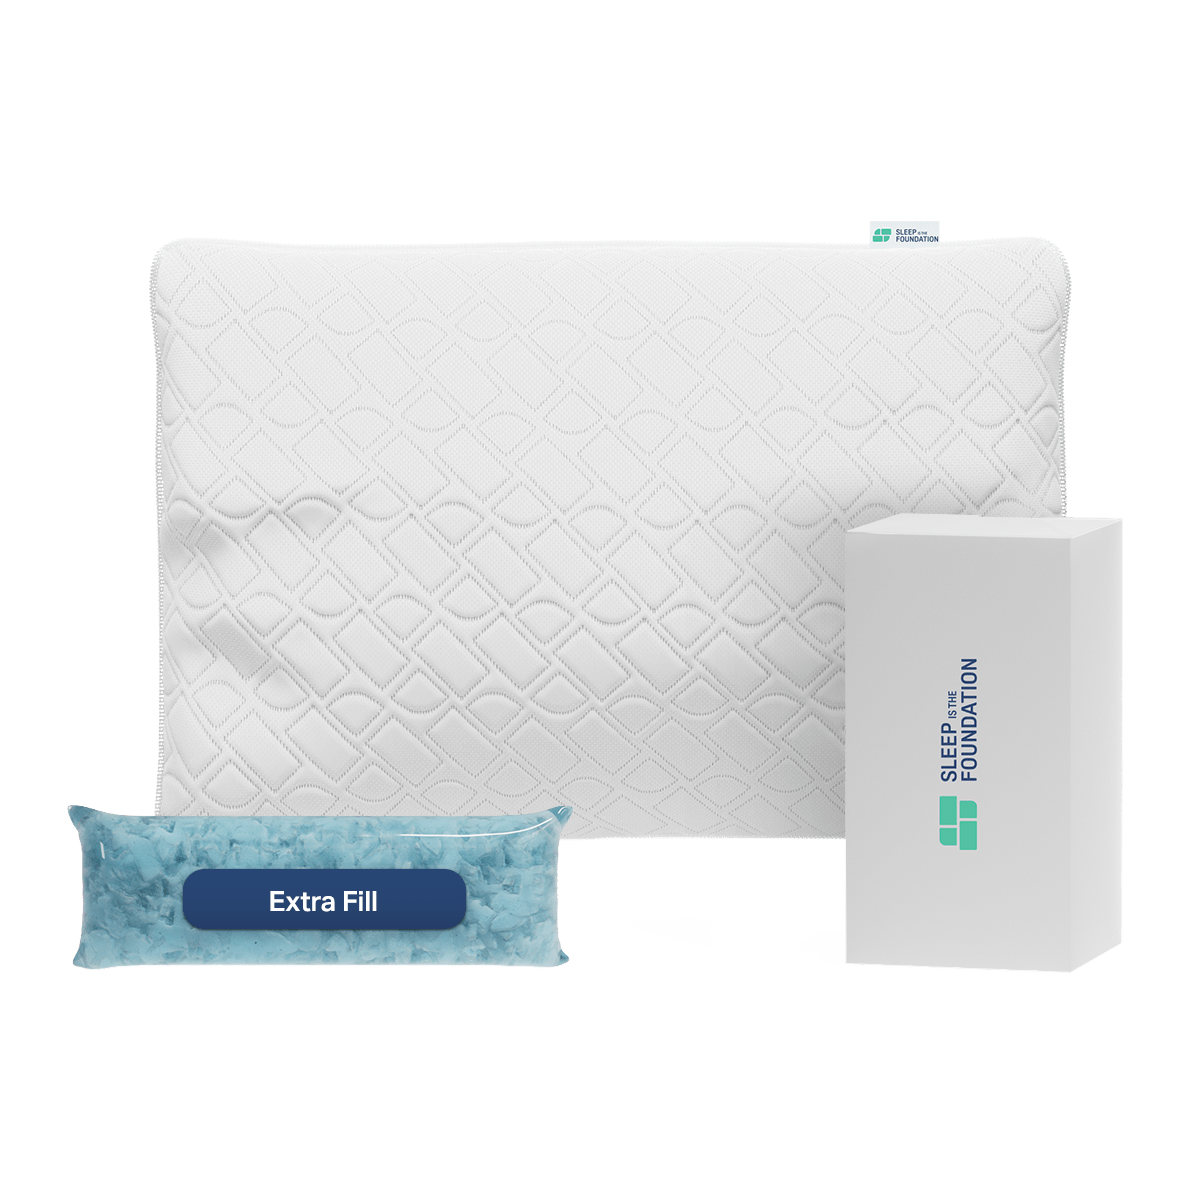 Sleep Is The Foundation Shredded Memory Foam Pillow for Sleeping - Adjustable & Cooling Pillow for Side Sleepers and All Sleeping Positions - Queen